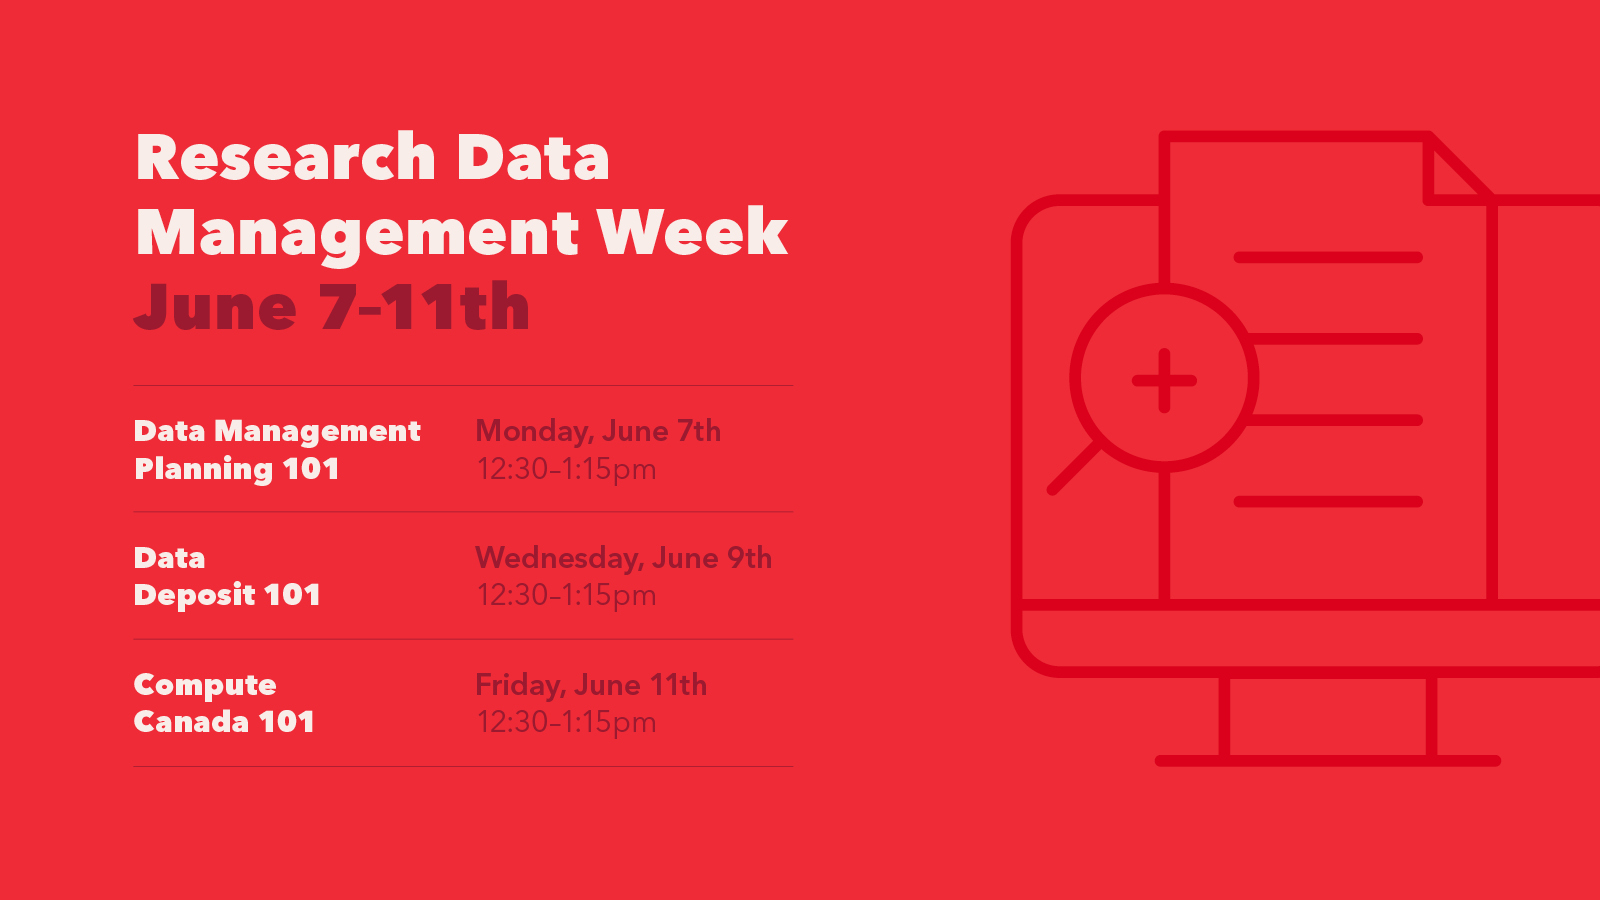 Graphic text: Research Data Management Week June 7-11